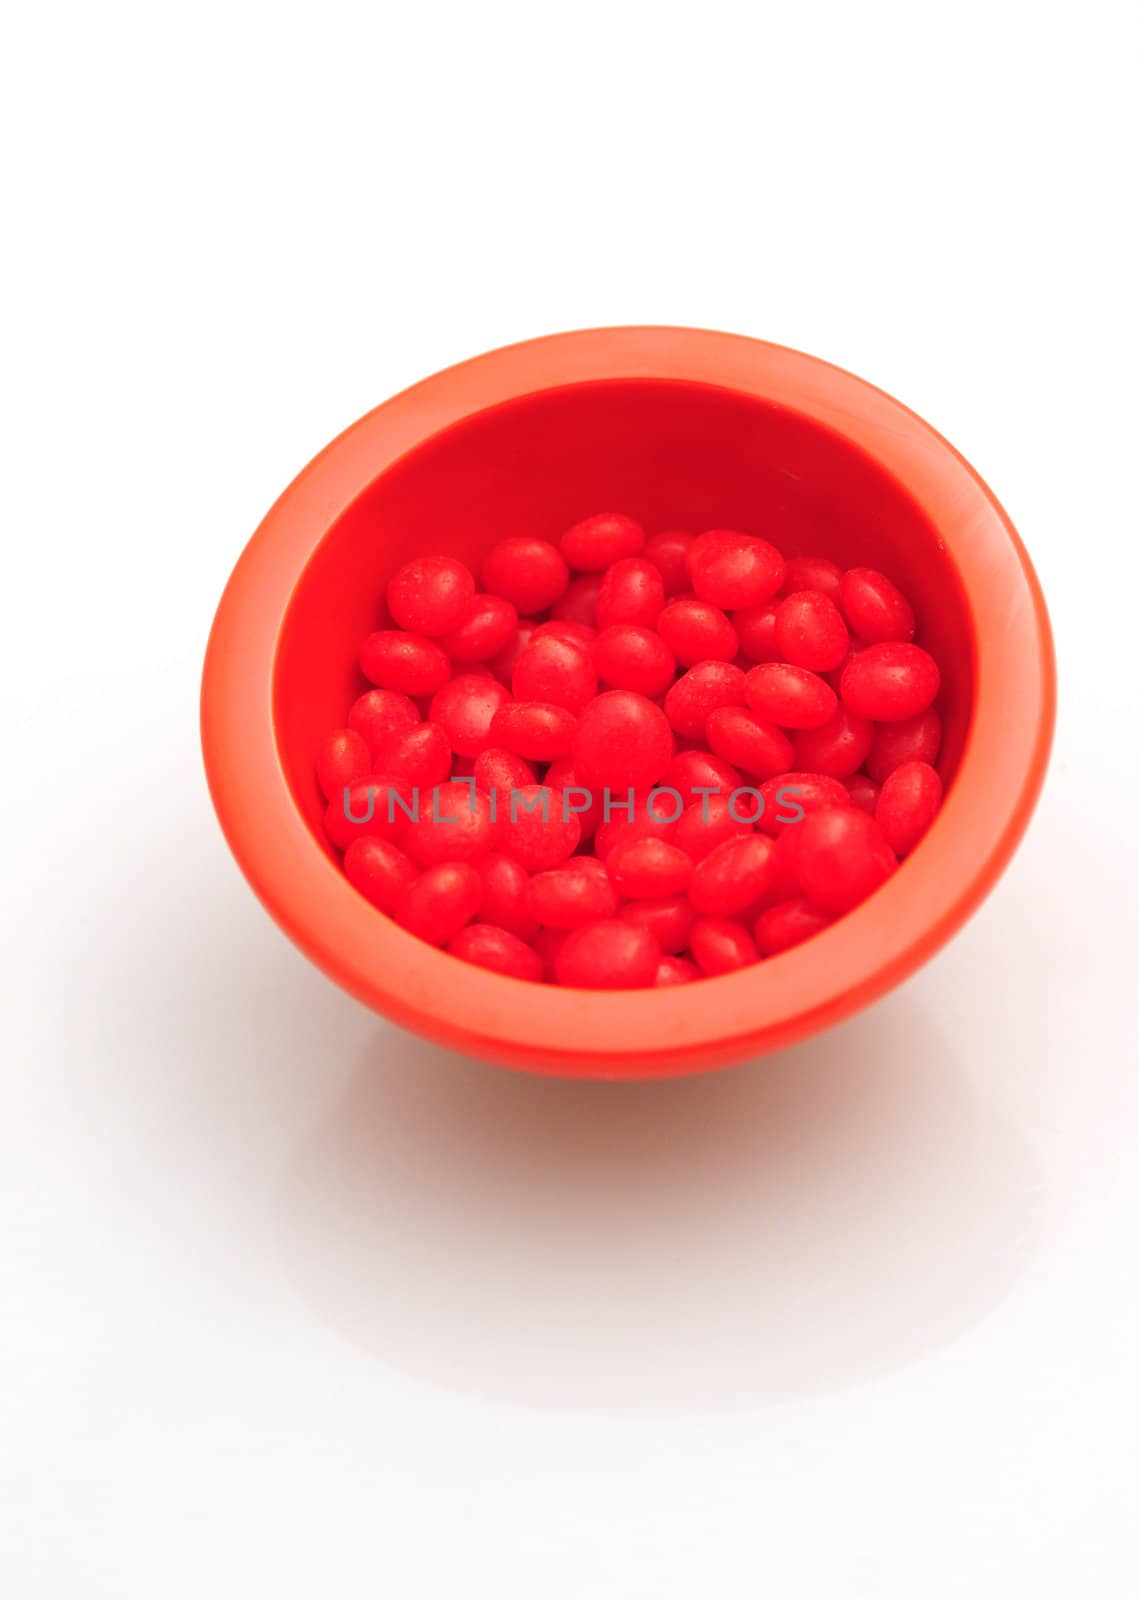 red hots candy in a bowl isolated on a white background